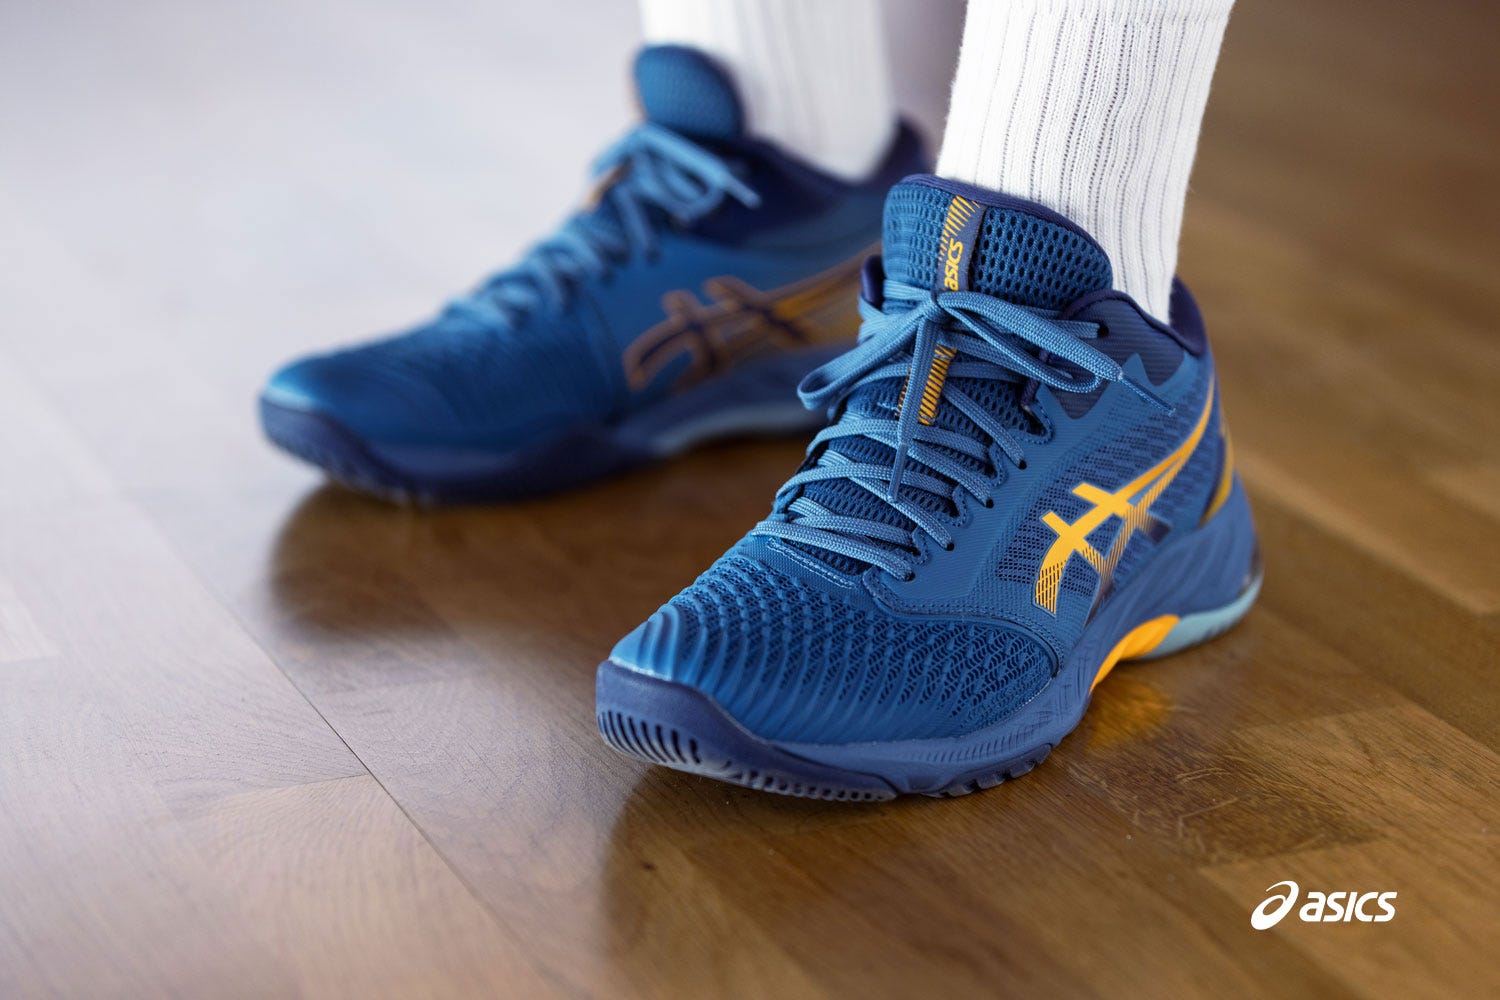 What makes ASICS products so comfortable.